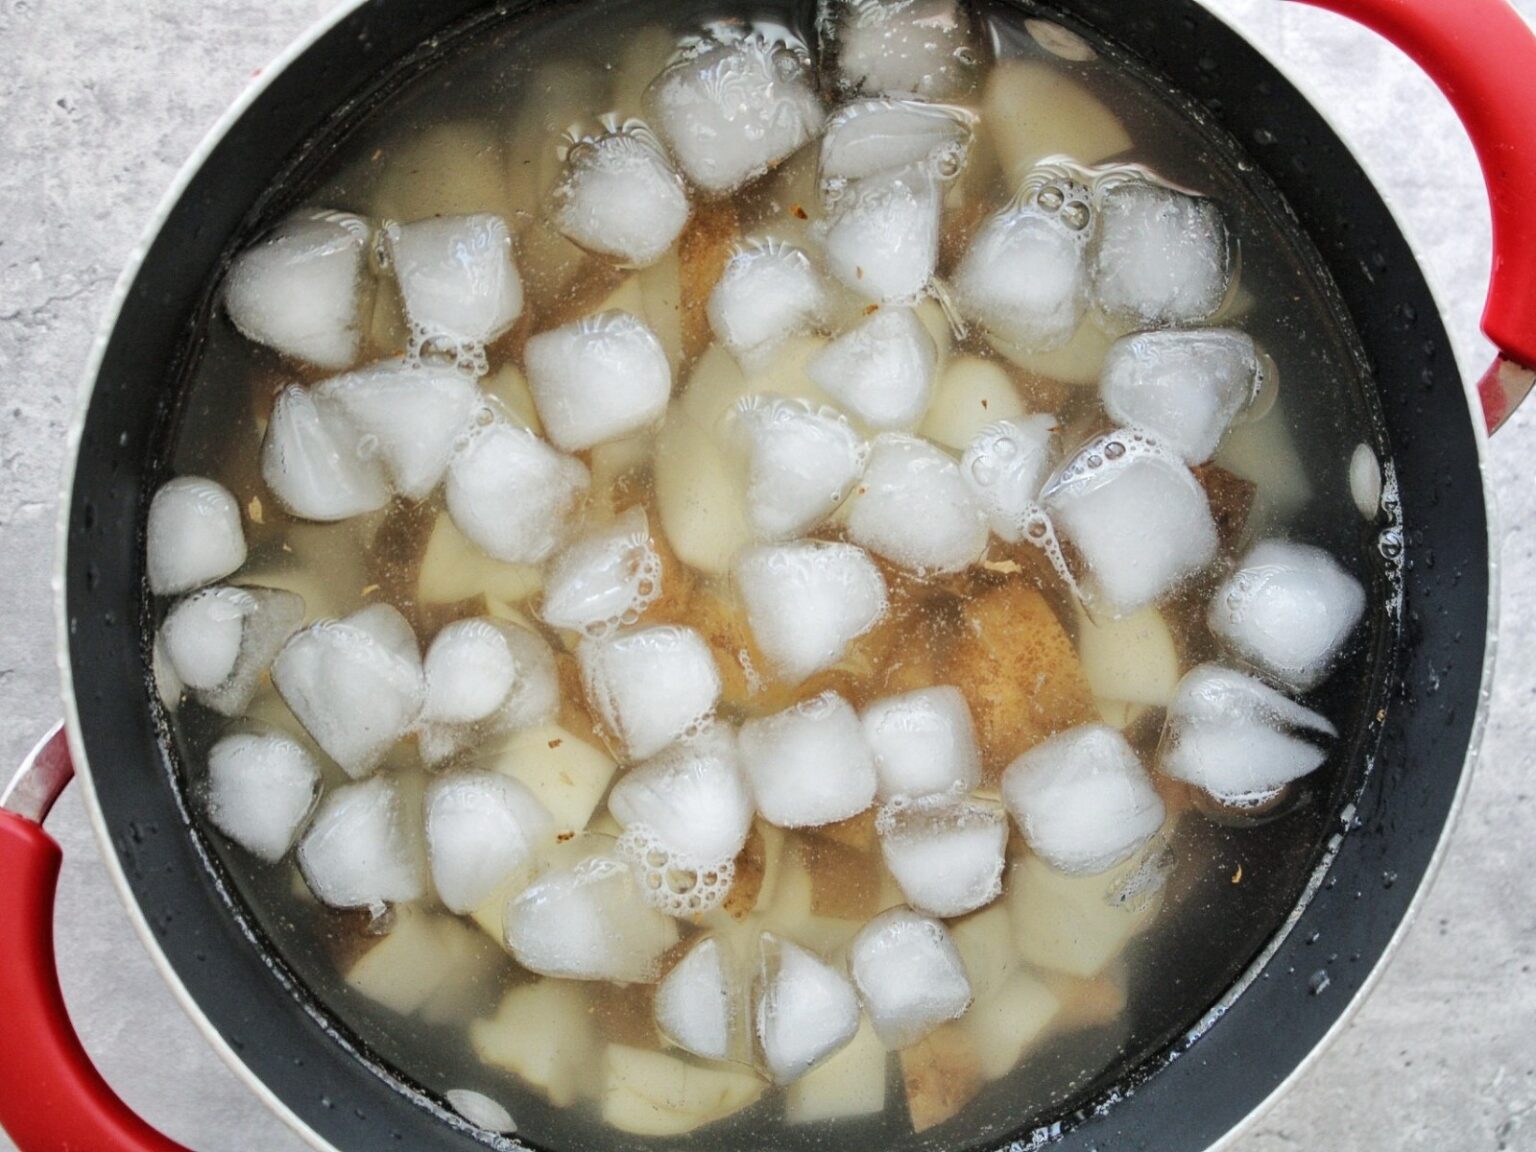 Chopeped russet potatoes in a large pot with ice cold water.